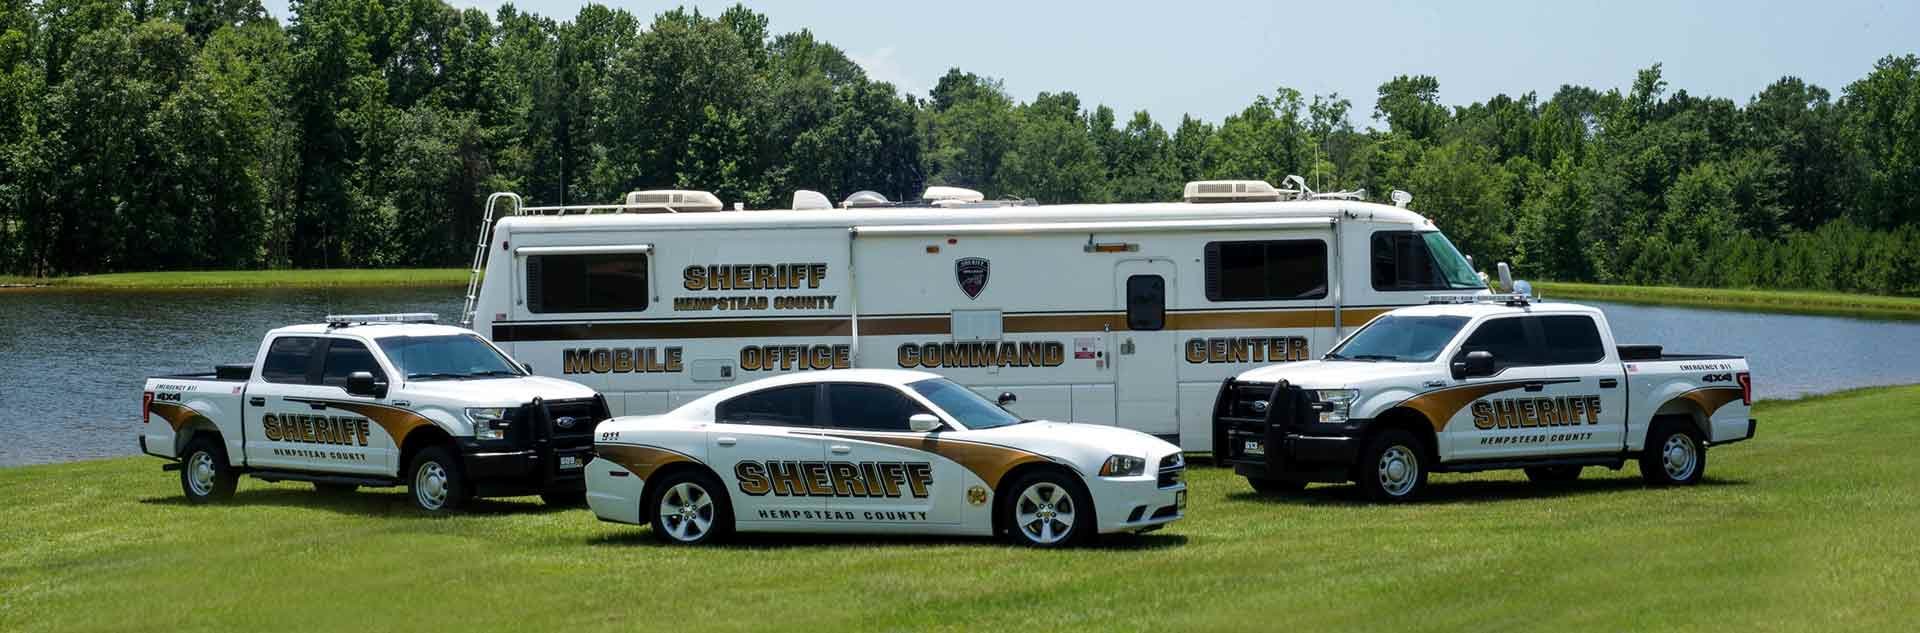 Sheriff Vehicles and Mobile Command Center